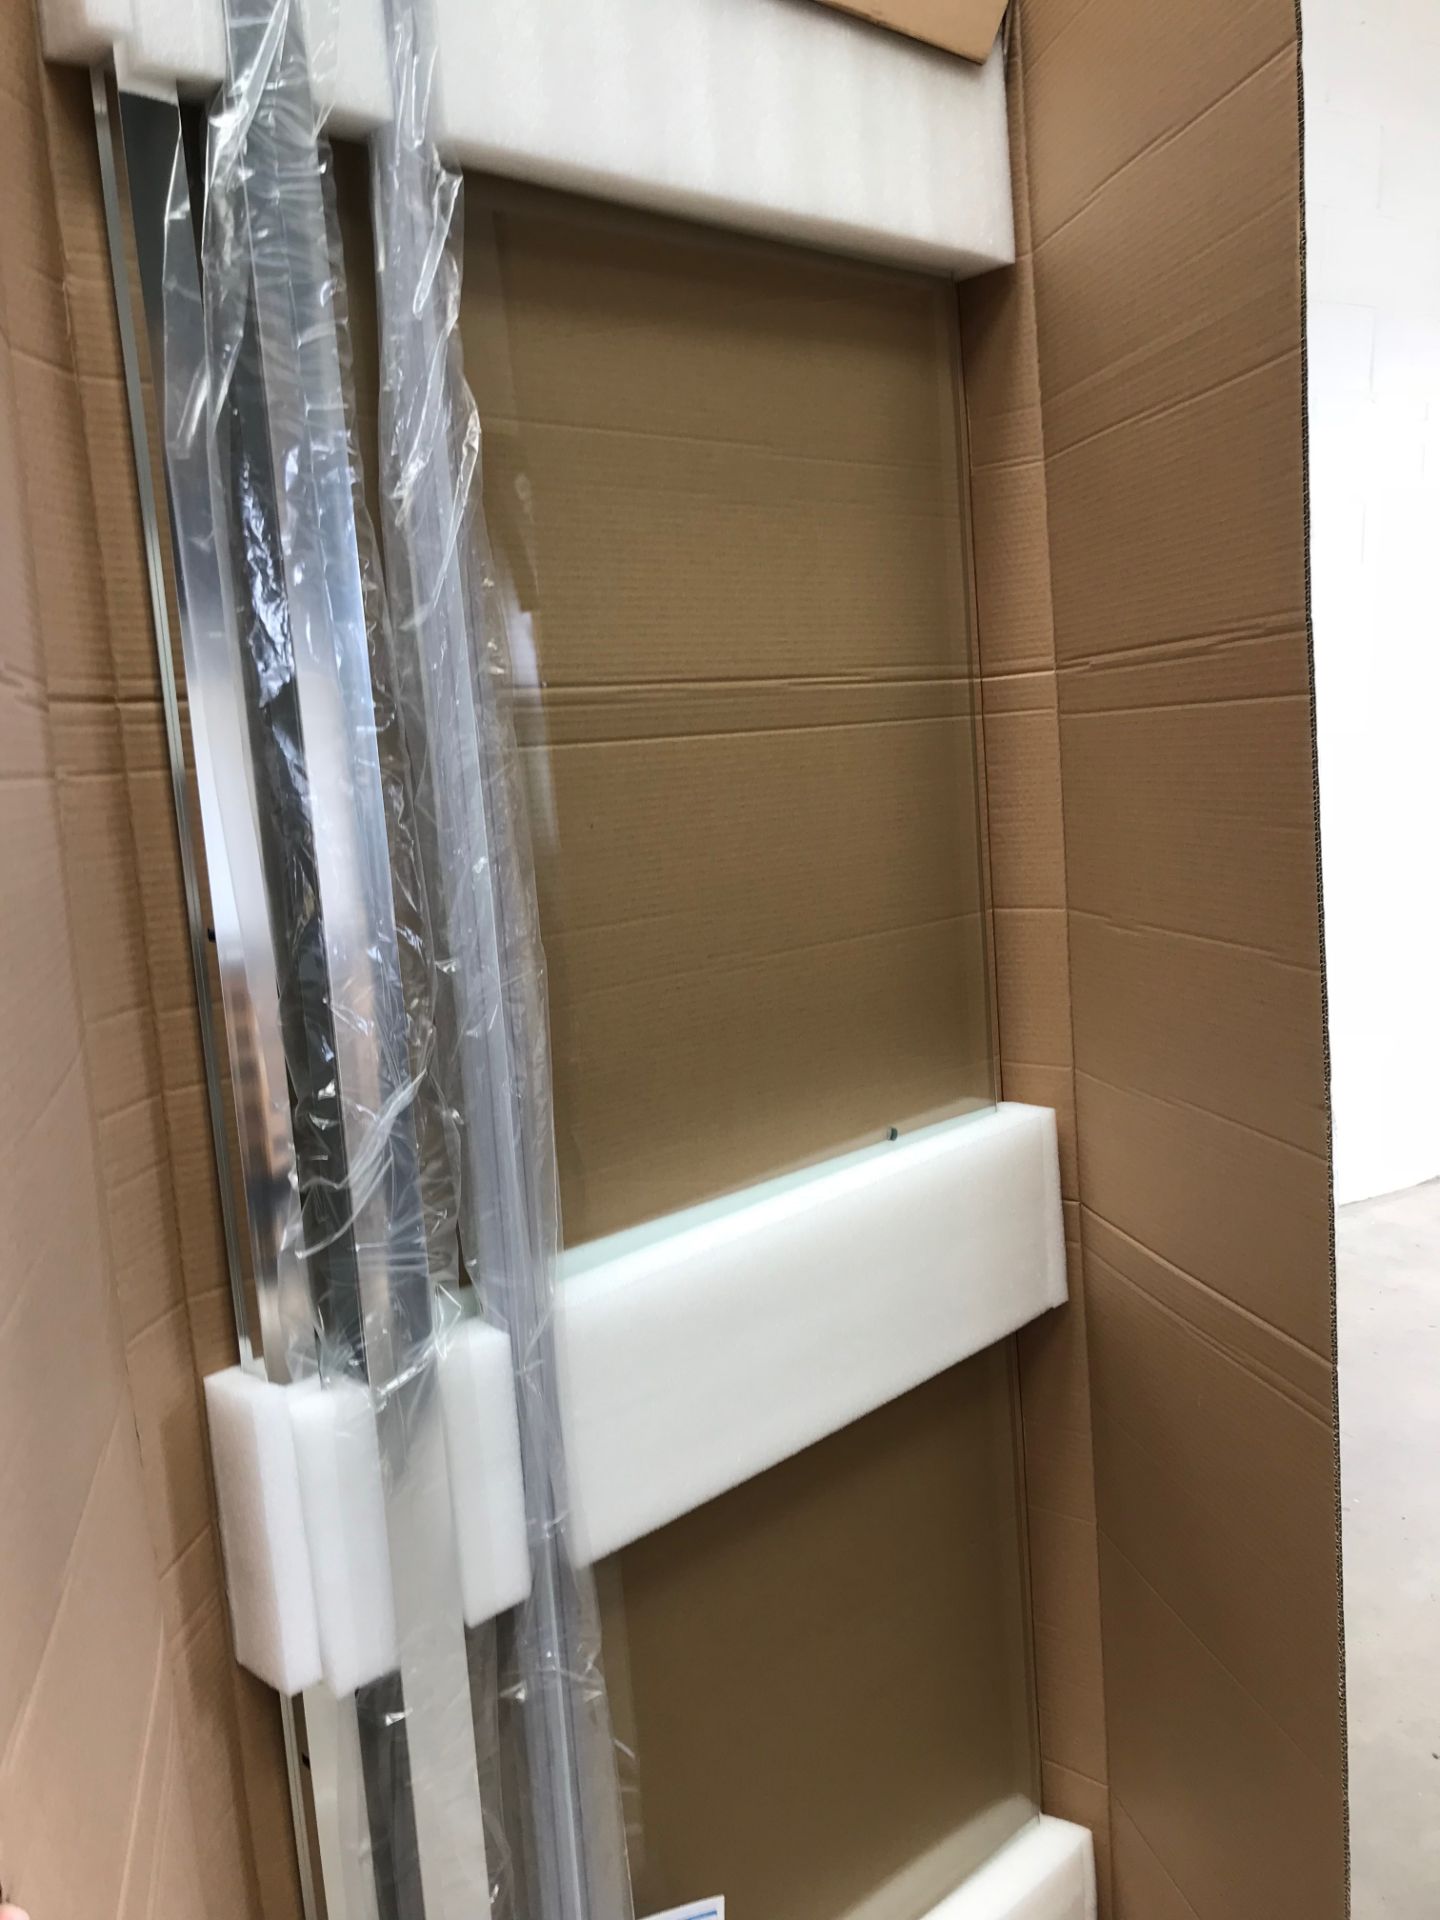 857-9 | 10 x SHOWER ENCLOSURE HINGE 900X900MM PIVOT C RRP of Pallet - £2839.9 Delivery charged at £ - Image 2 of 6